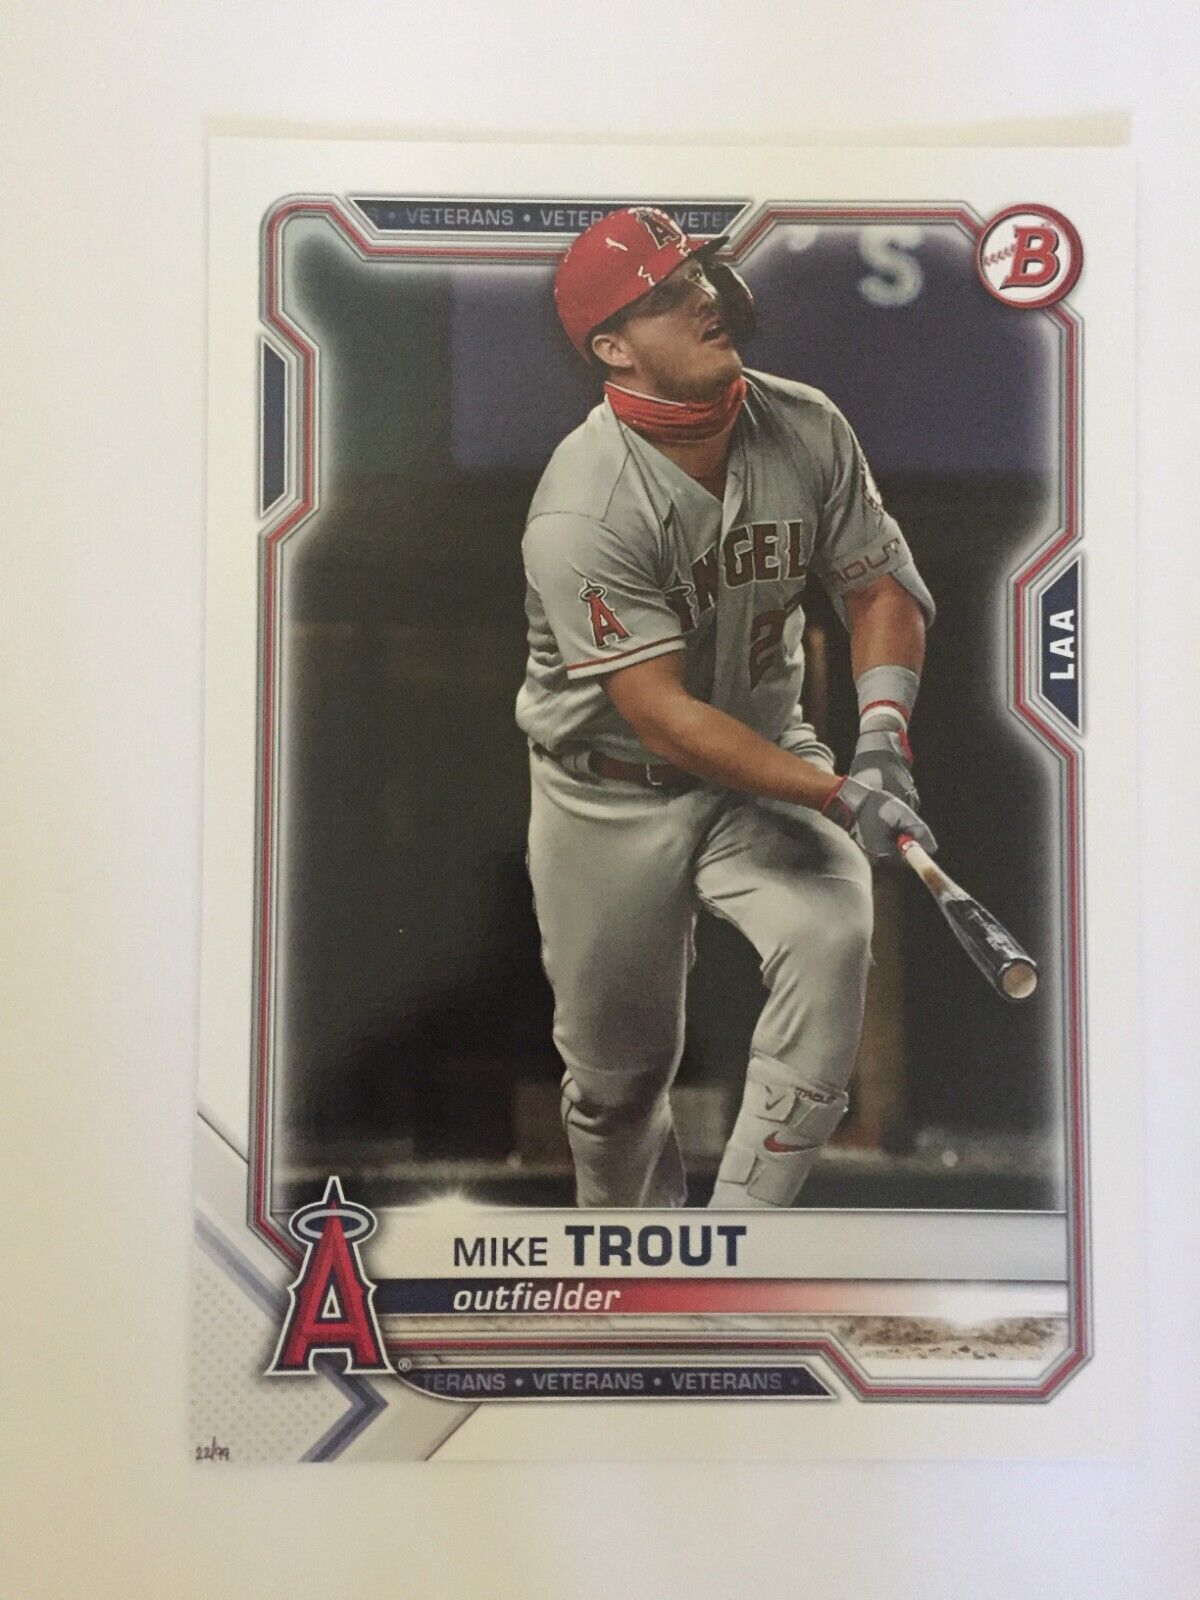 2021 Bowman Baseball Base Card Los Angeles Angels Mike Trout 14\'\' x 10\'\' Poster